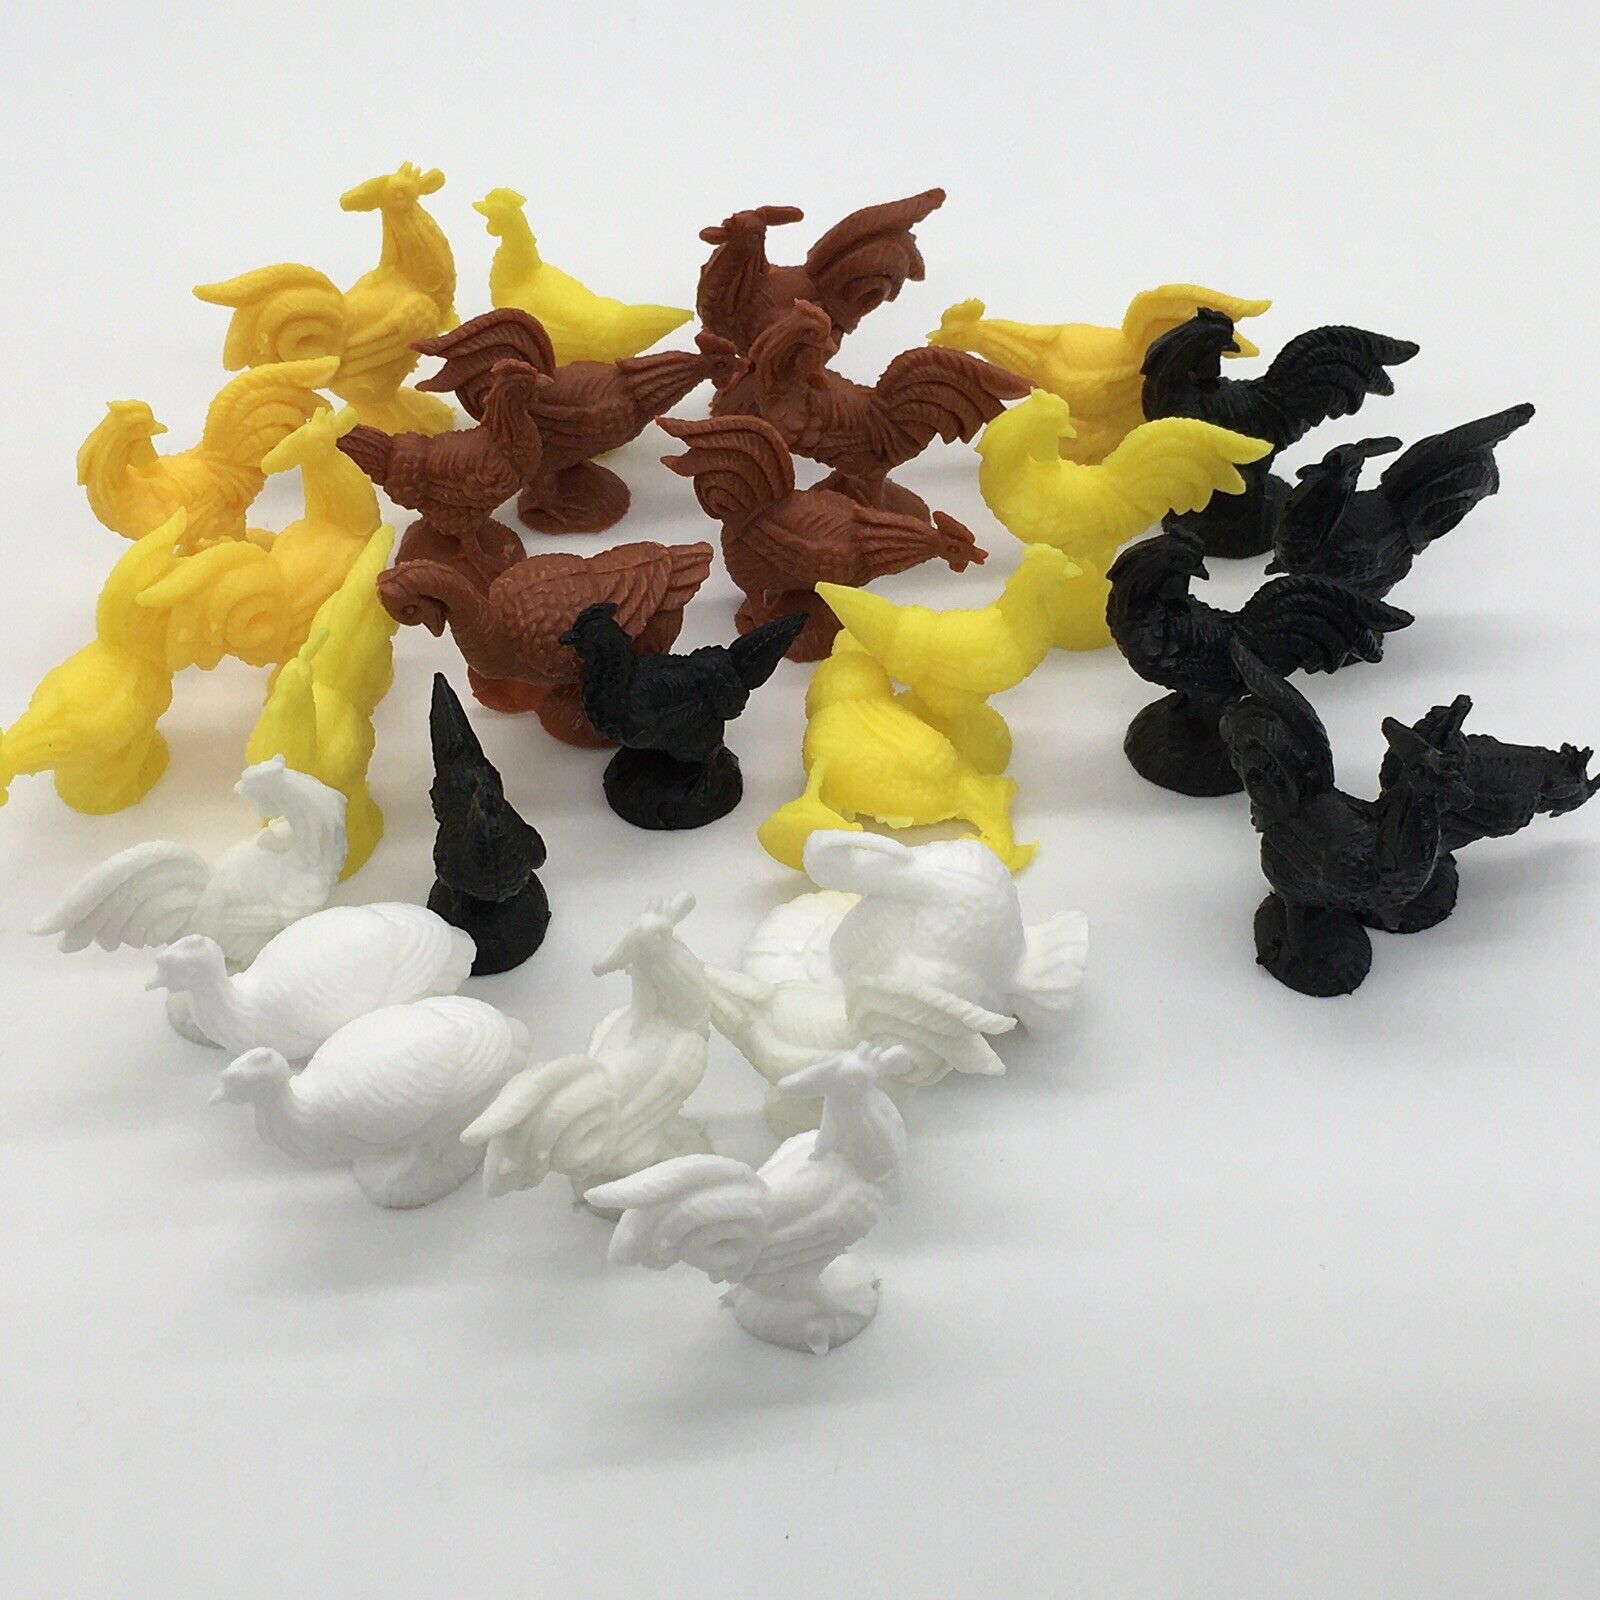 Dollhouse Toy White Rooster Chicken Pcs Micro-mini Miniature 1-1 1/4” MINT 30 PC